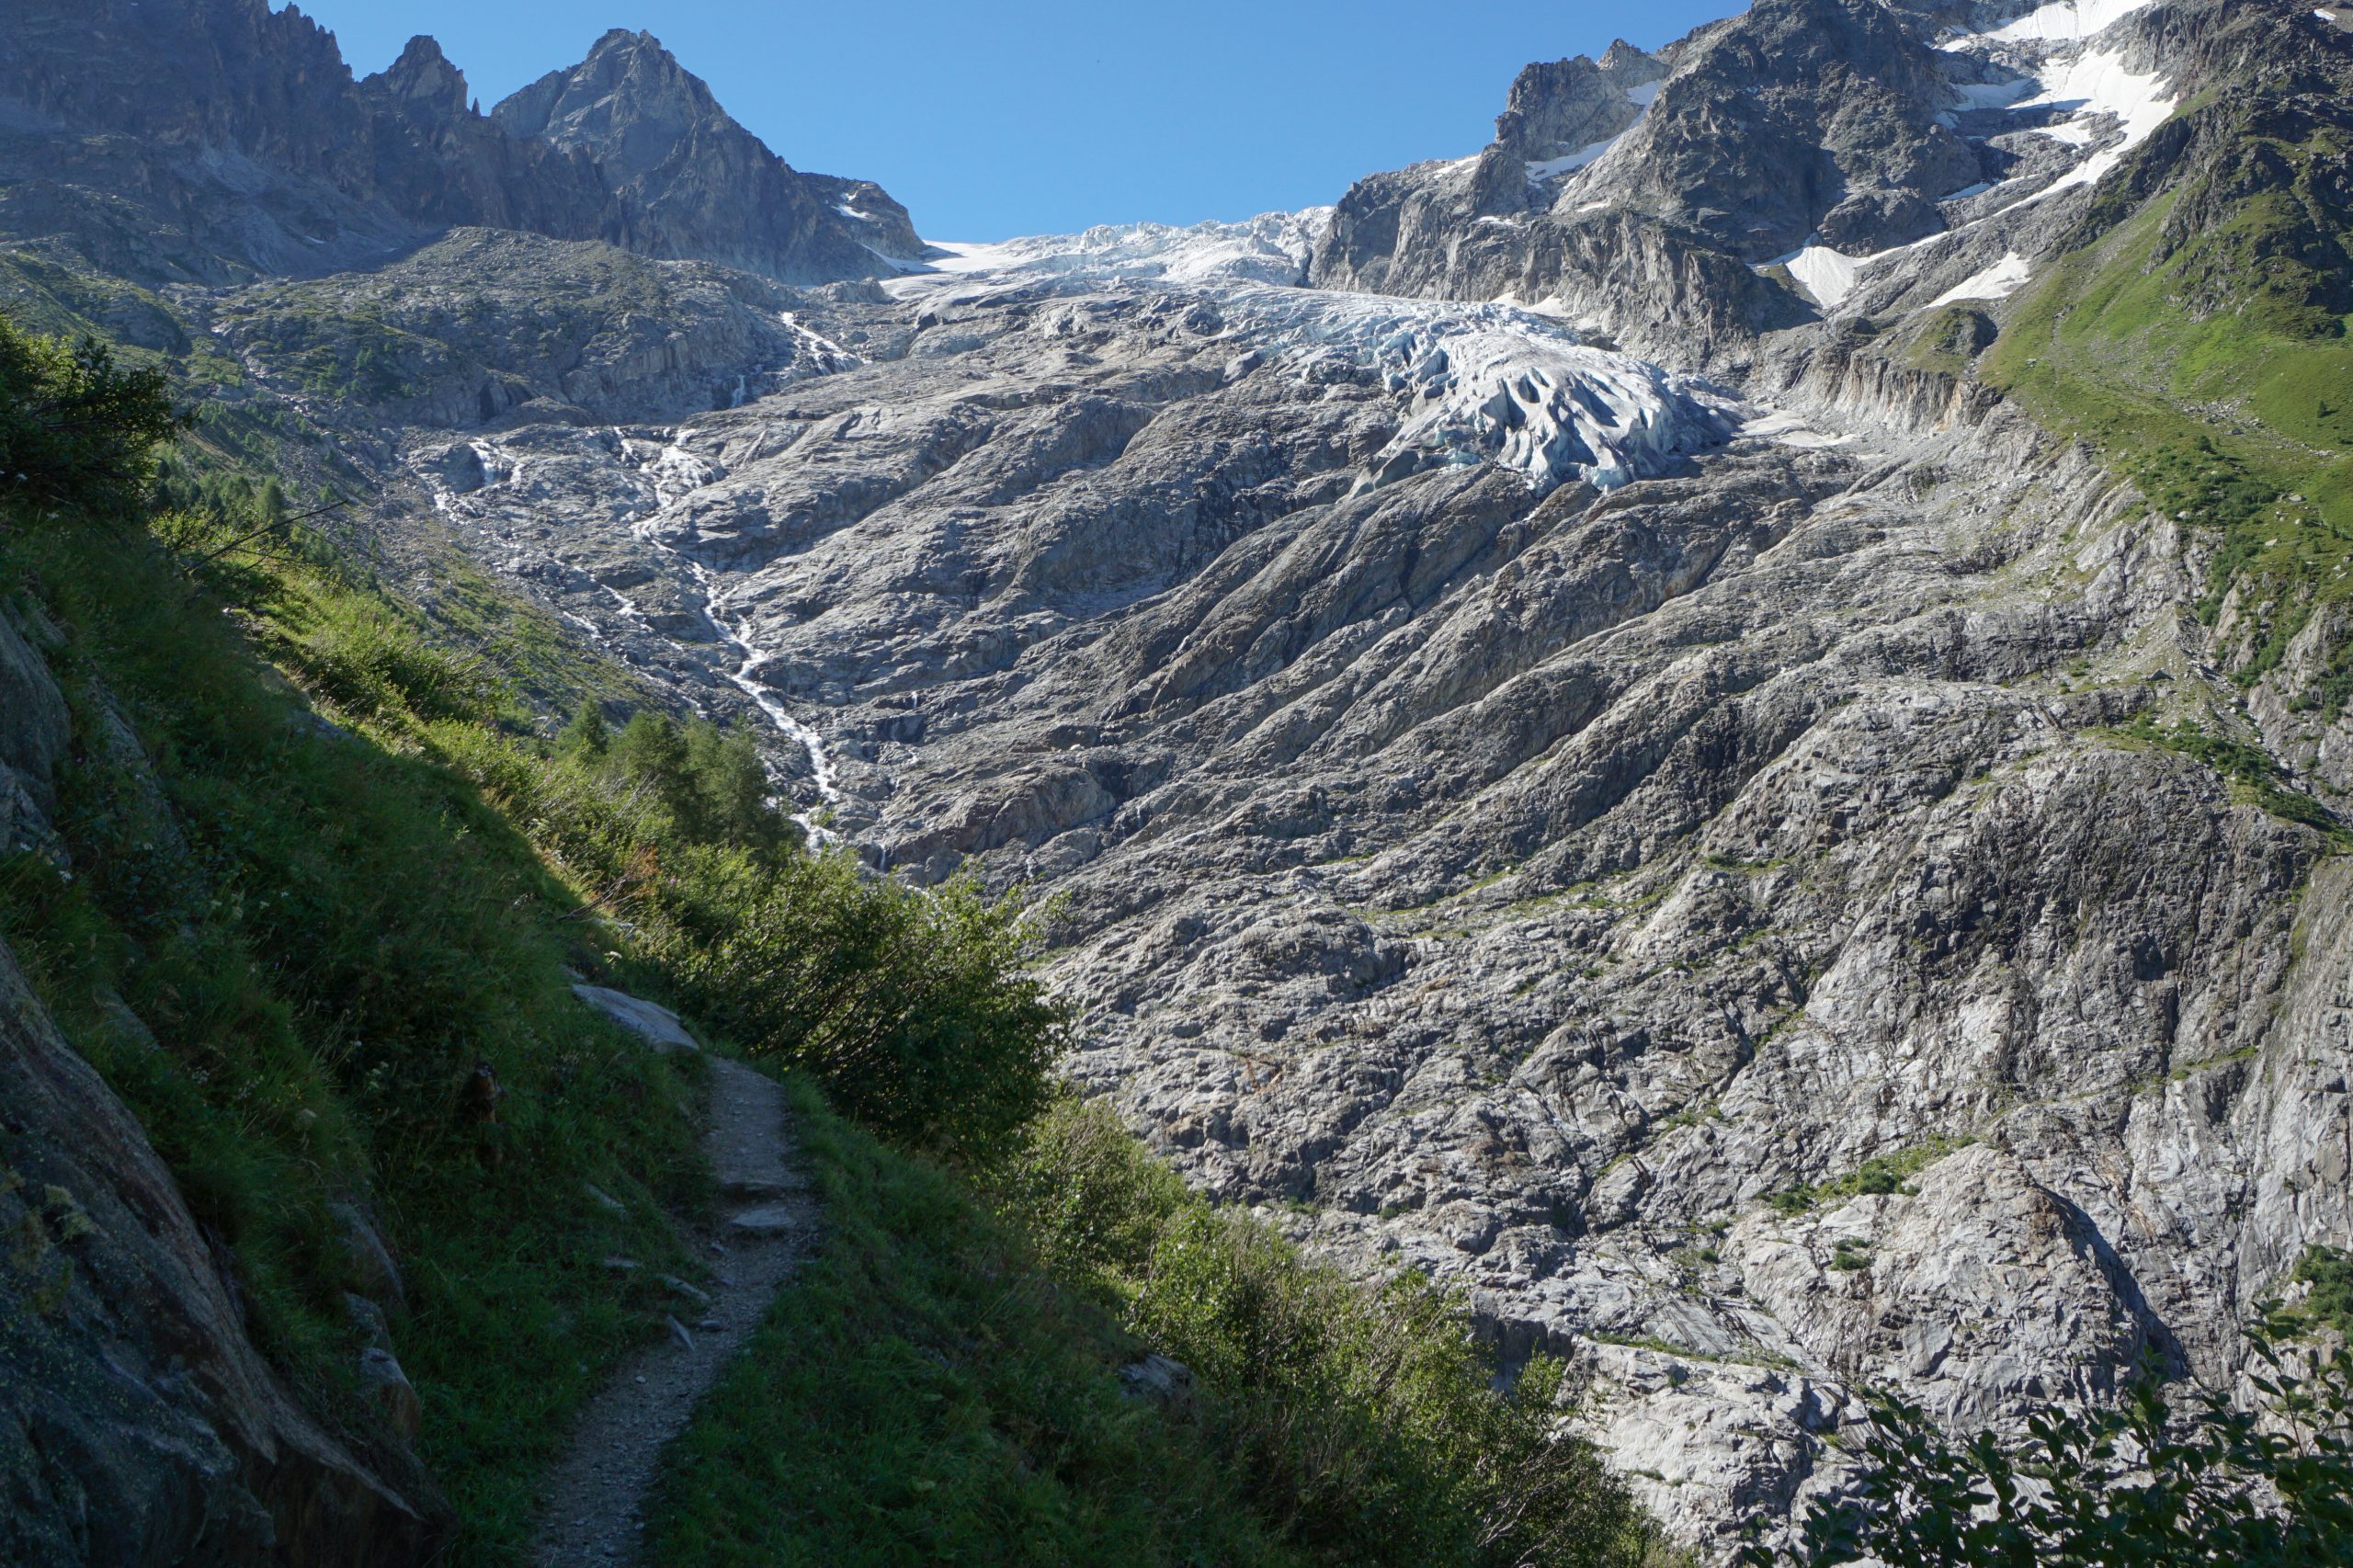 The Glacier du Trient seems so close! And look how massive it used to be